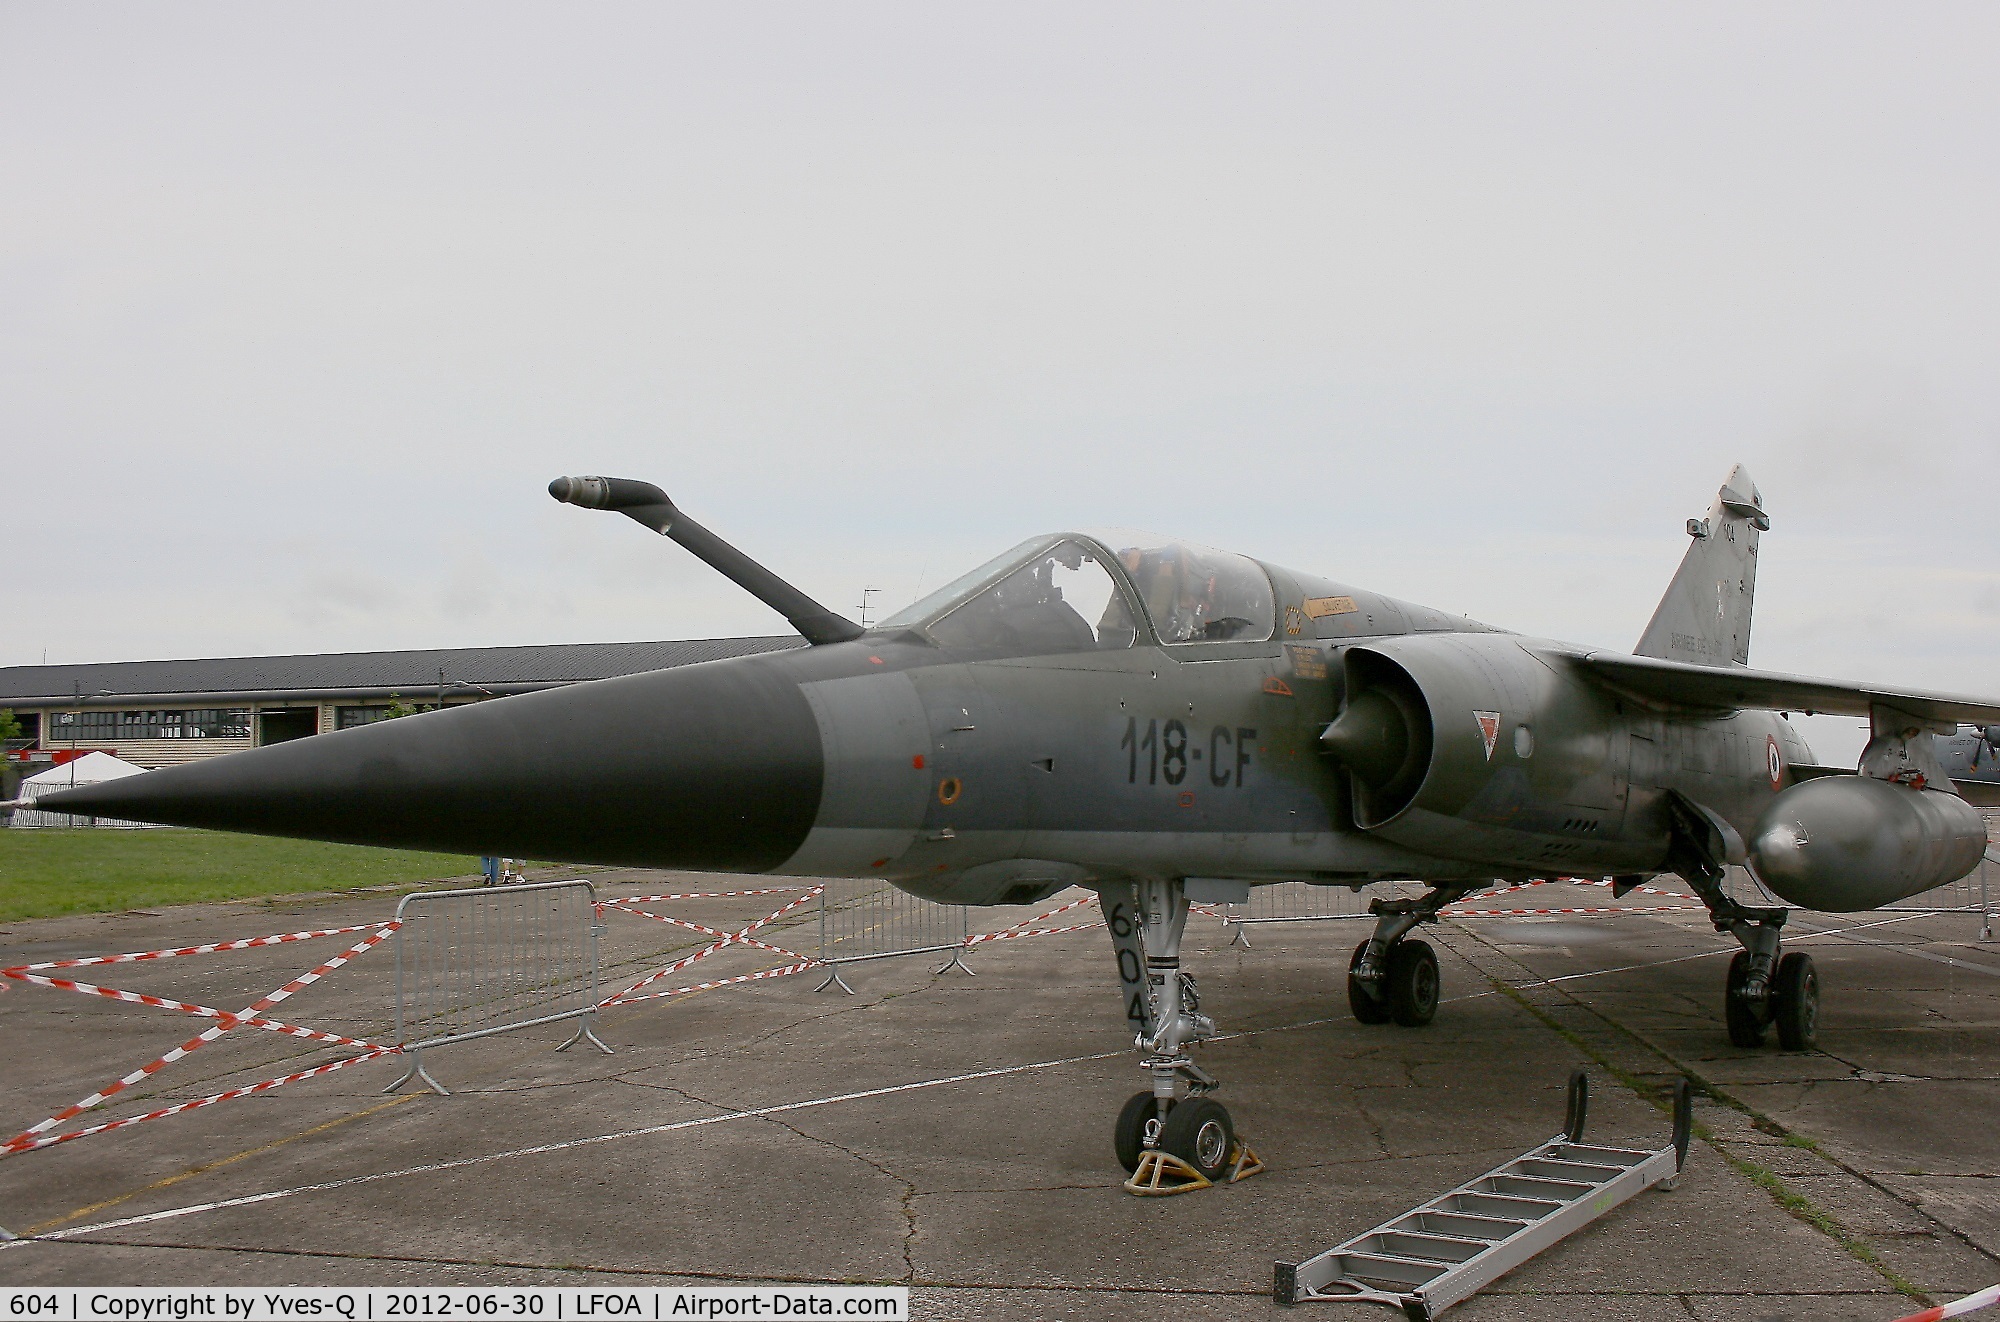 604, Dassault Mirage F.1CR C/N 604, French Air Force Dassault Mirage F1CR (118-CF), Static display, Avord Air Base 702 (LFOA) open day 2012